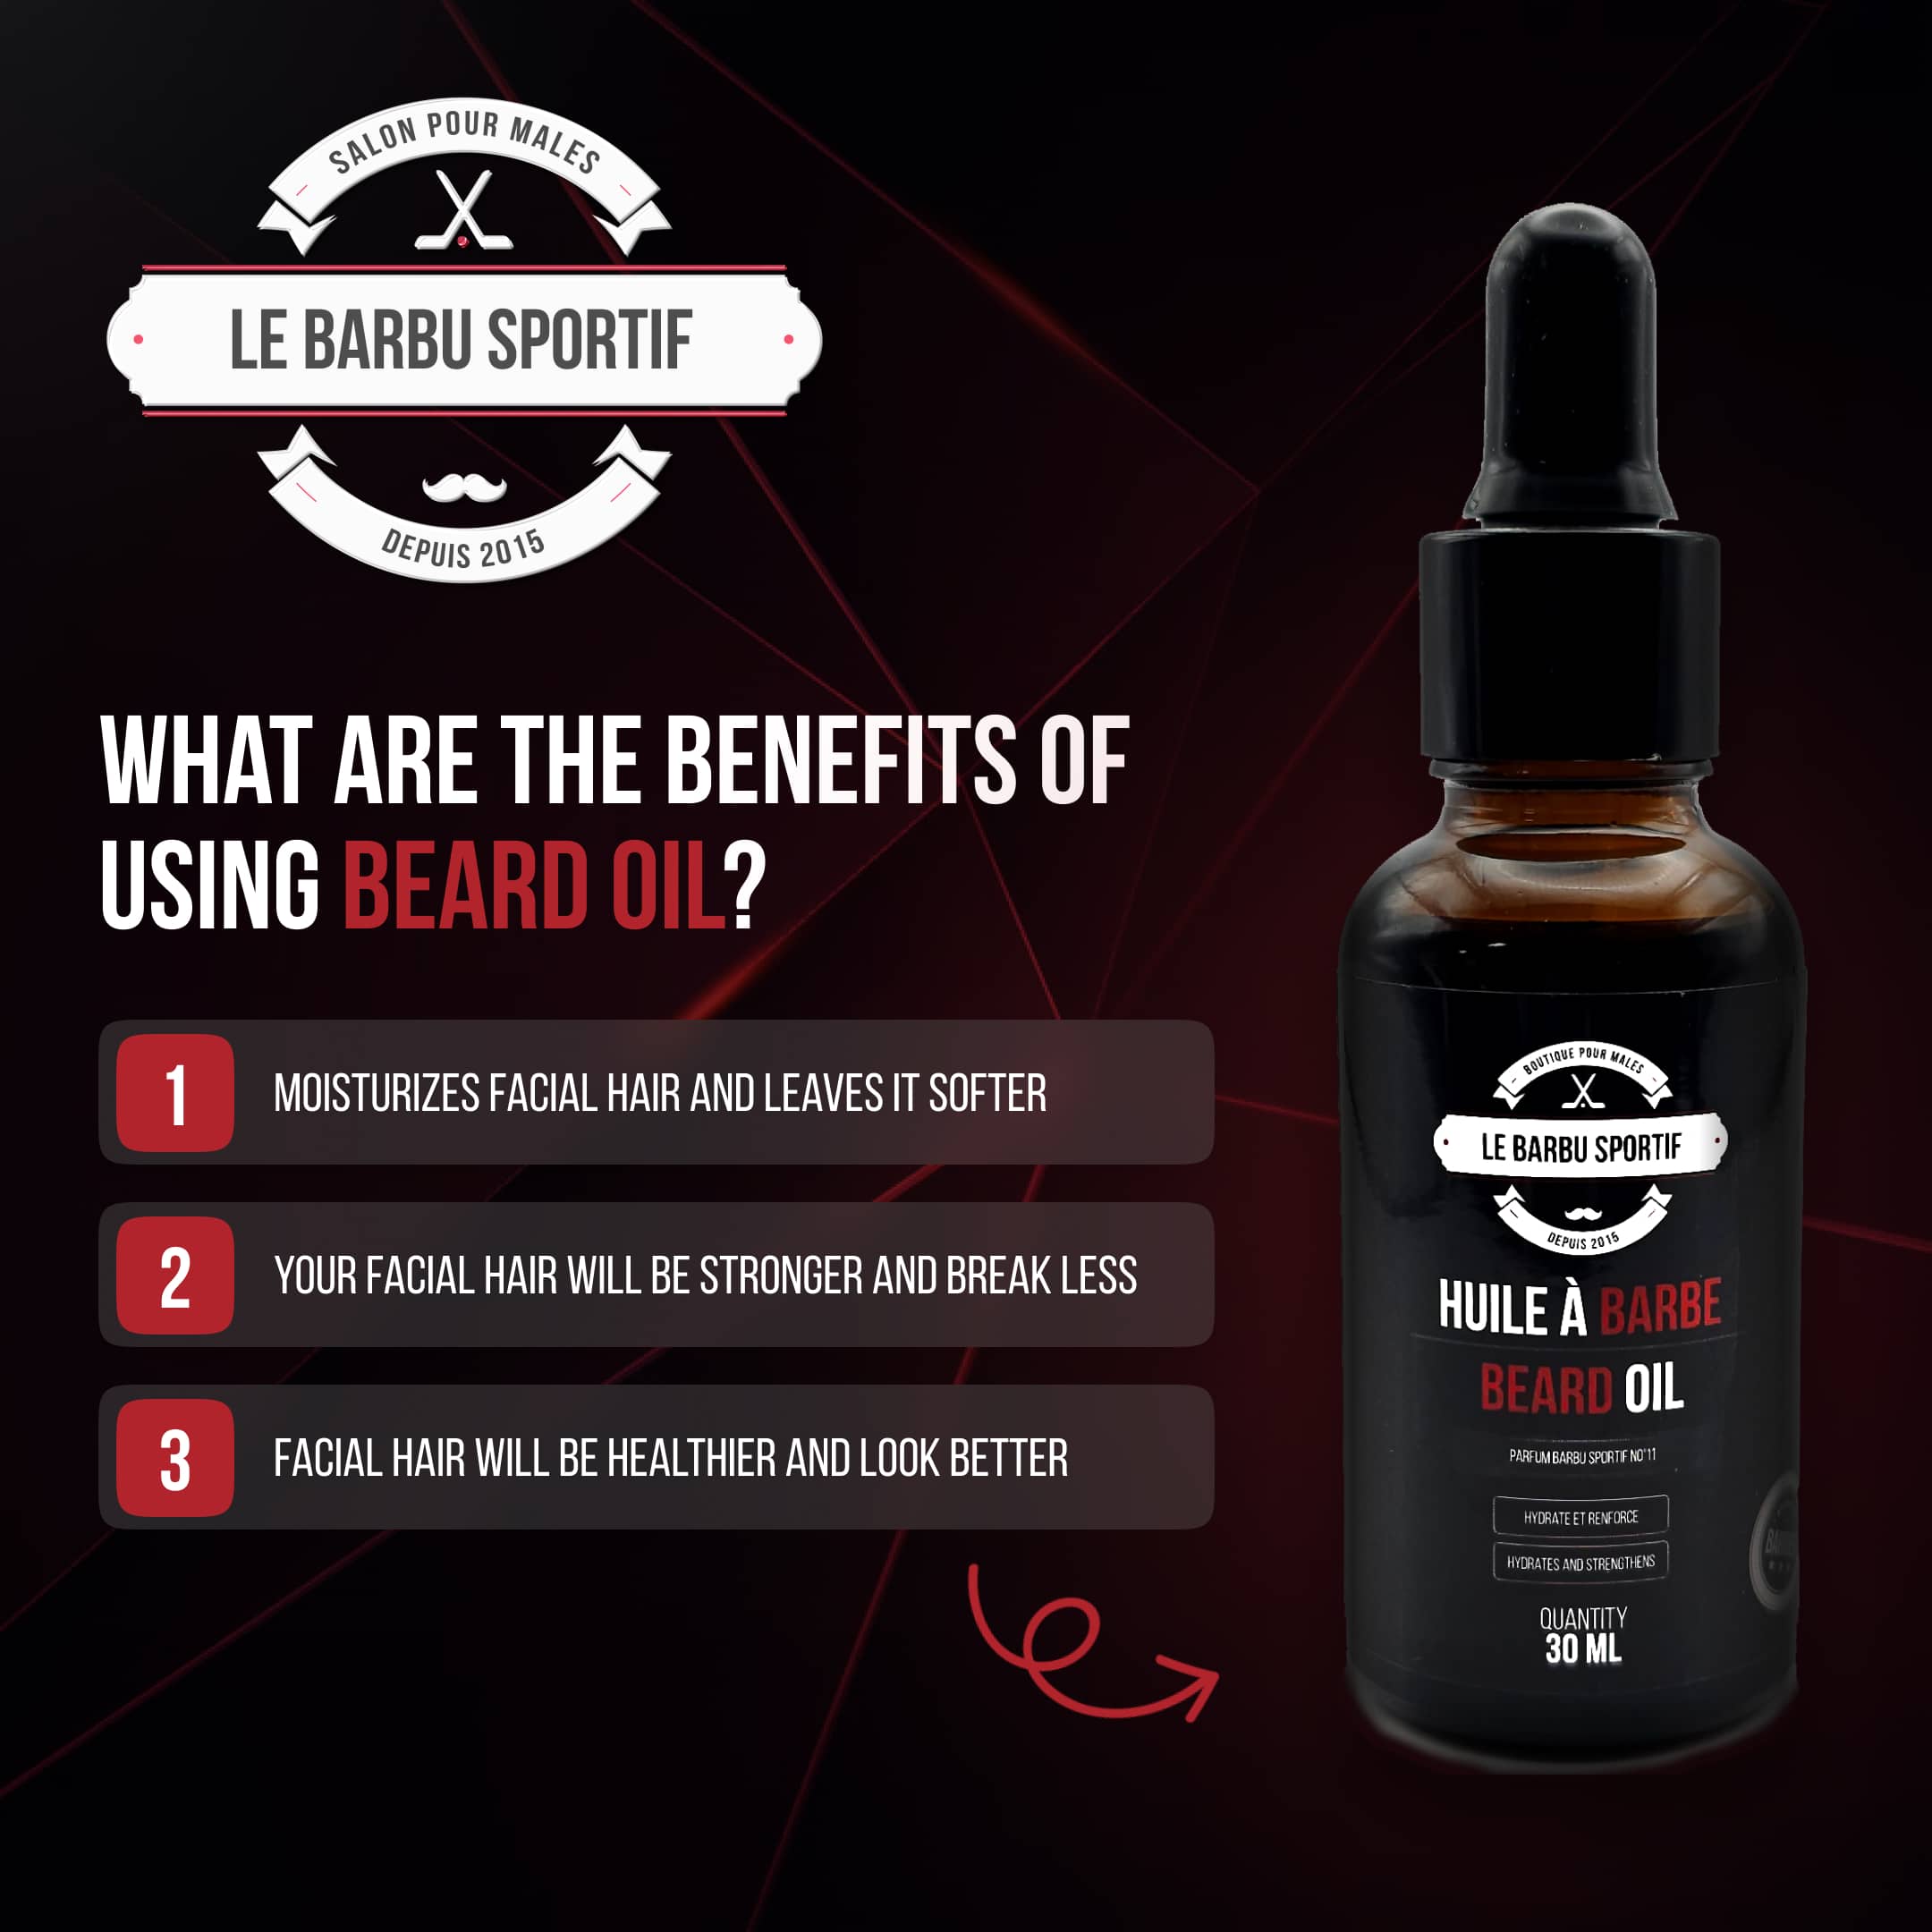 What are the benefits of using beard oil?